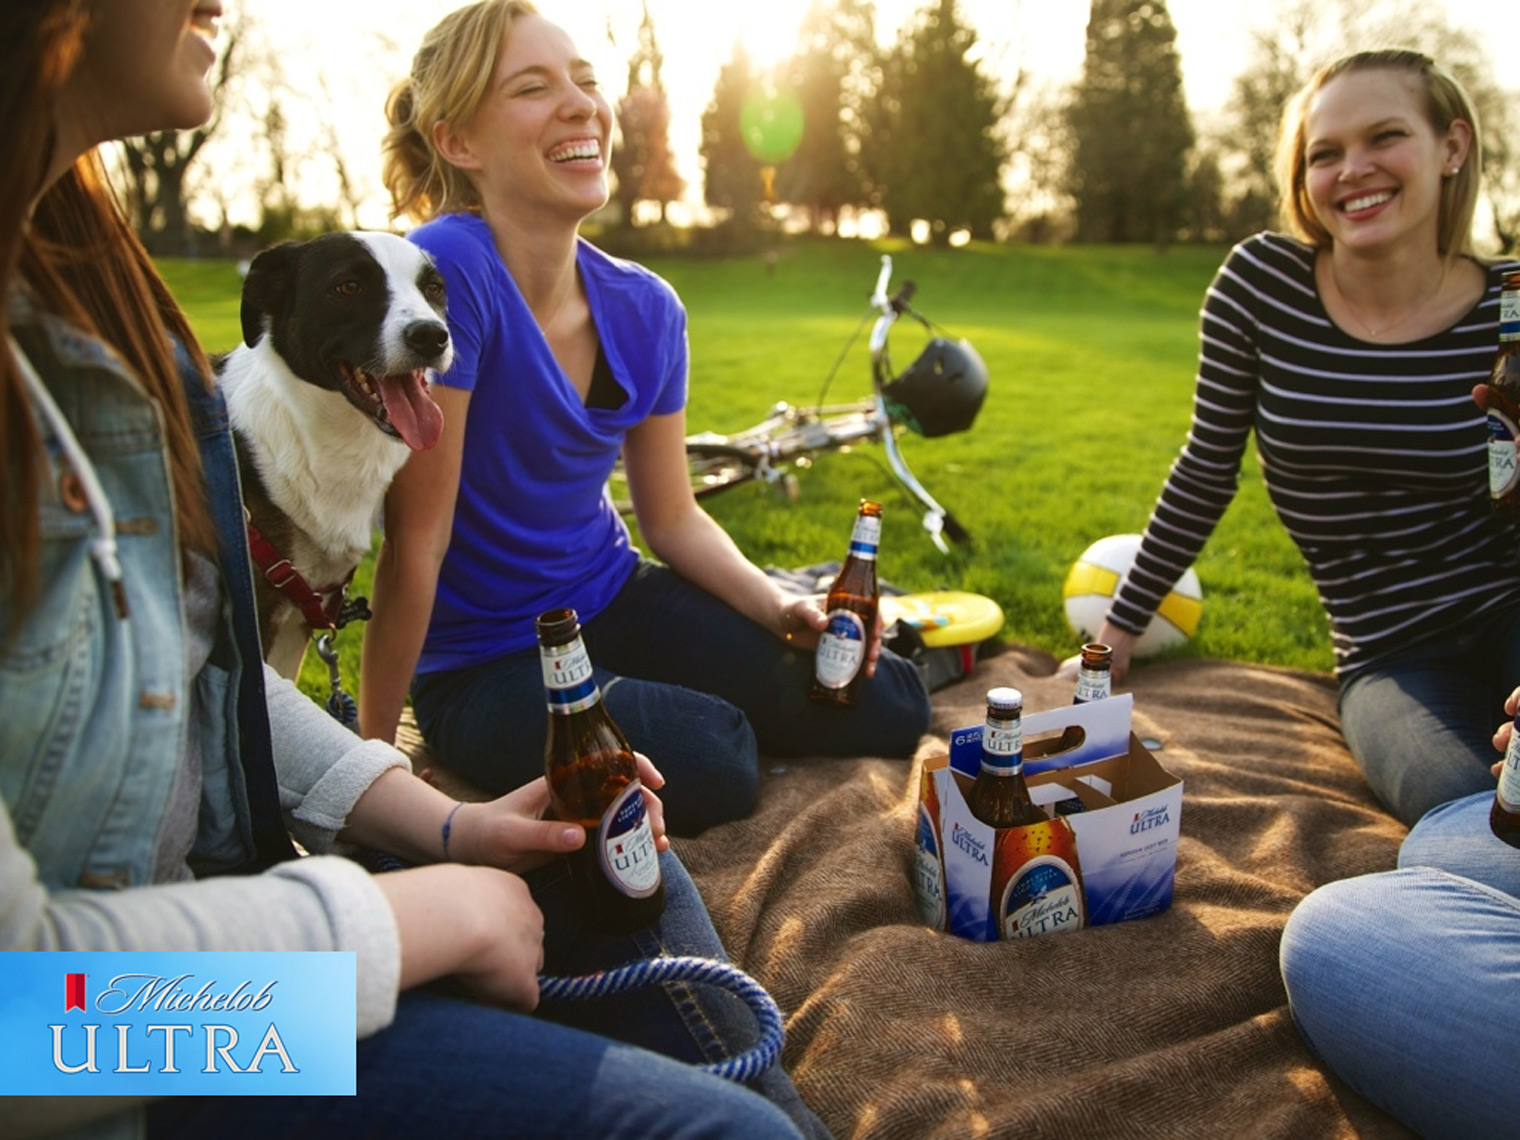 Friends enjoy the park with a six pack of beer and a dog